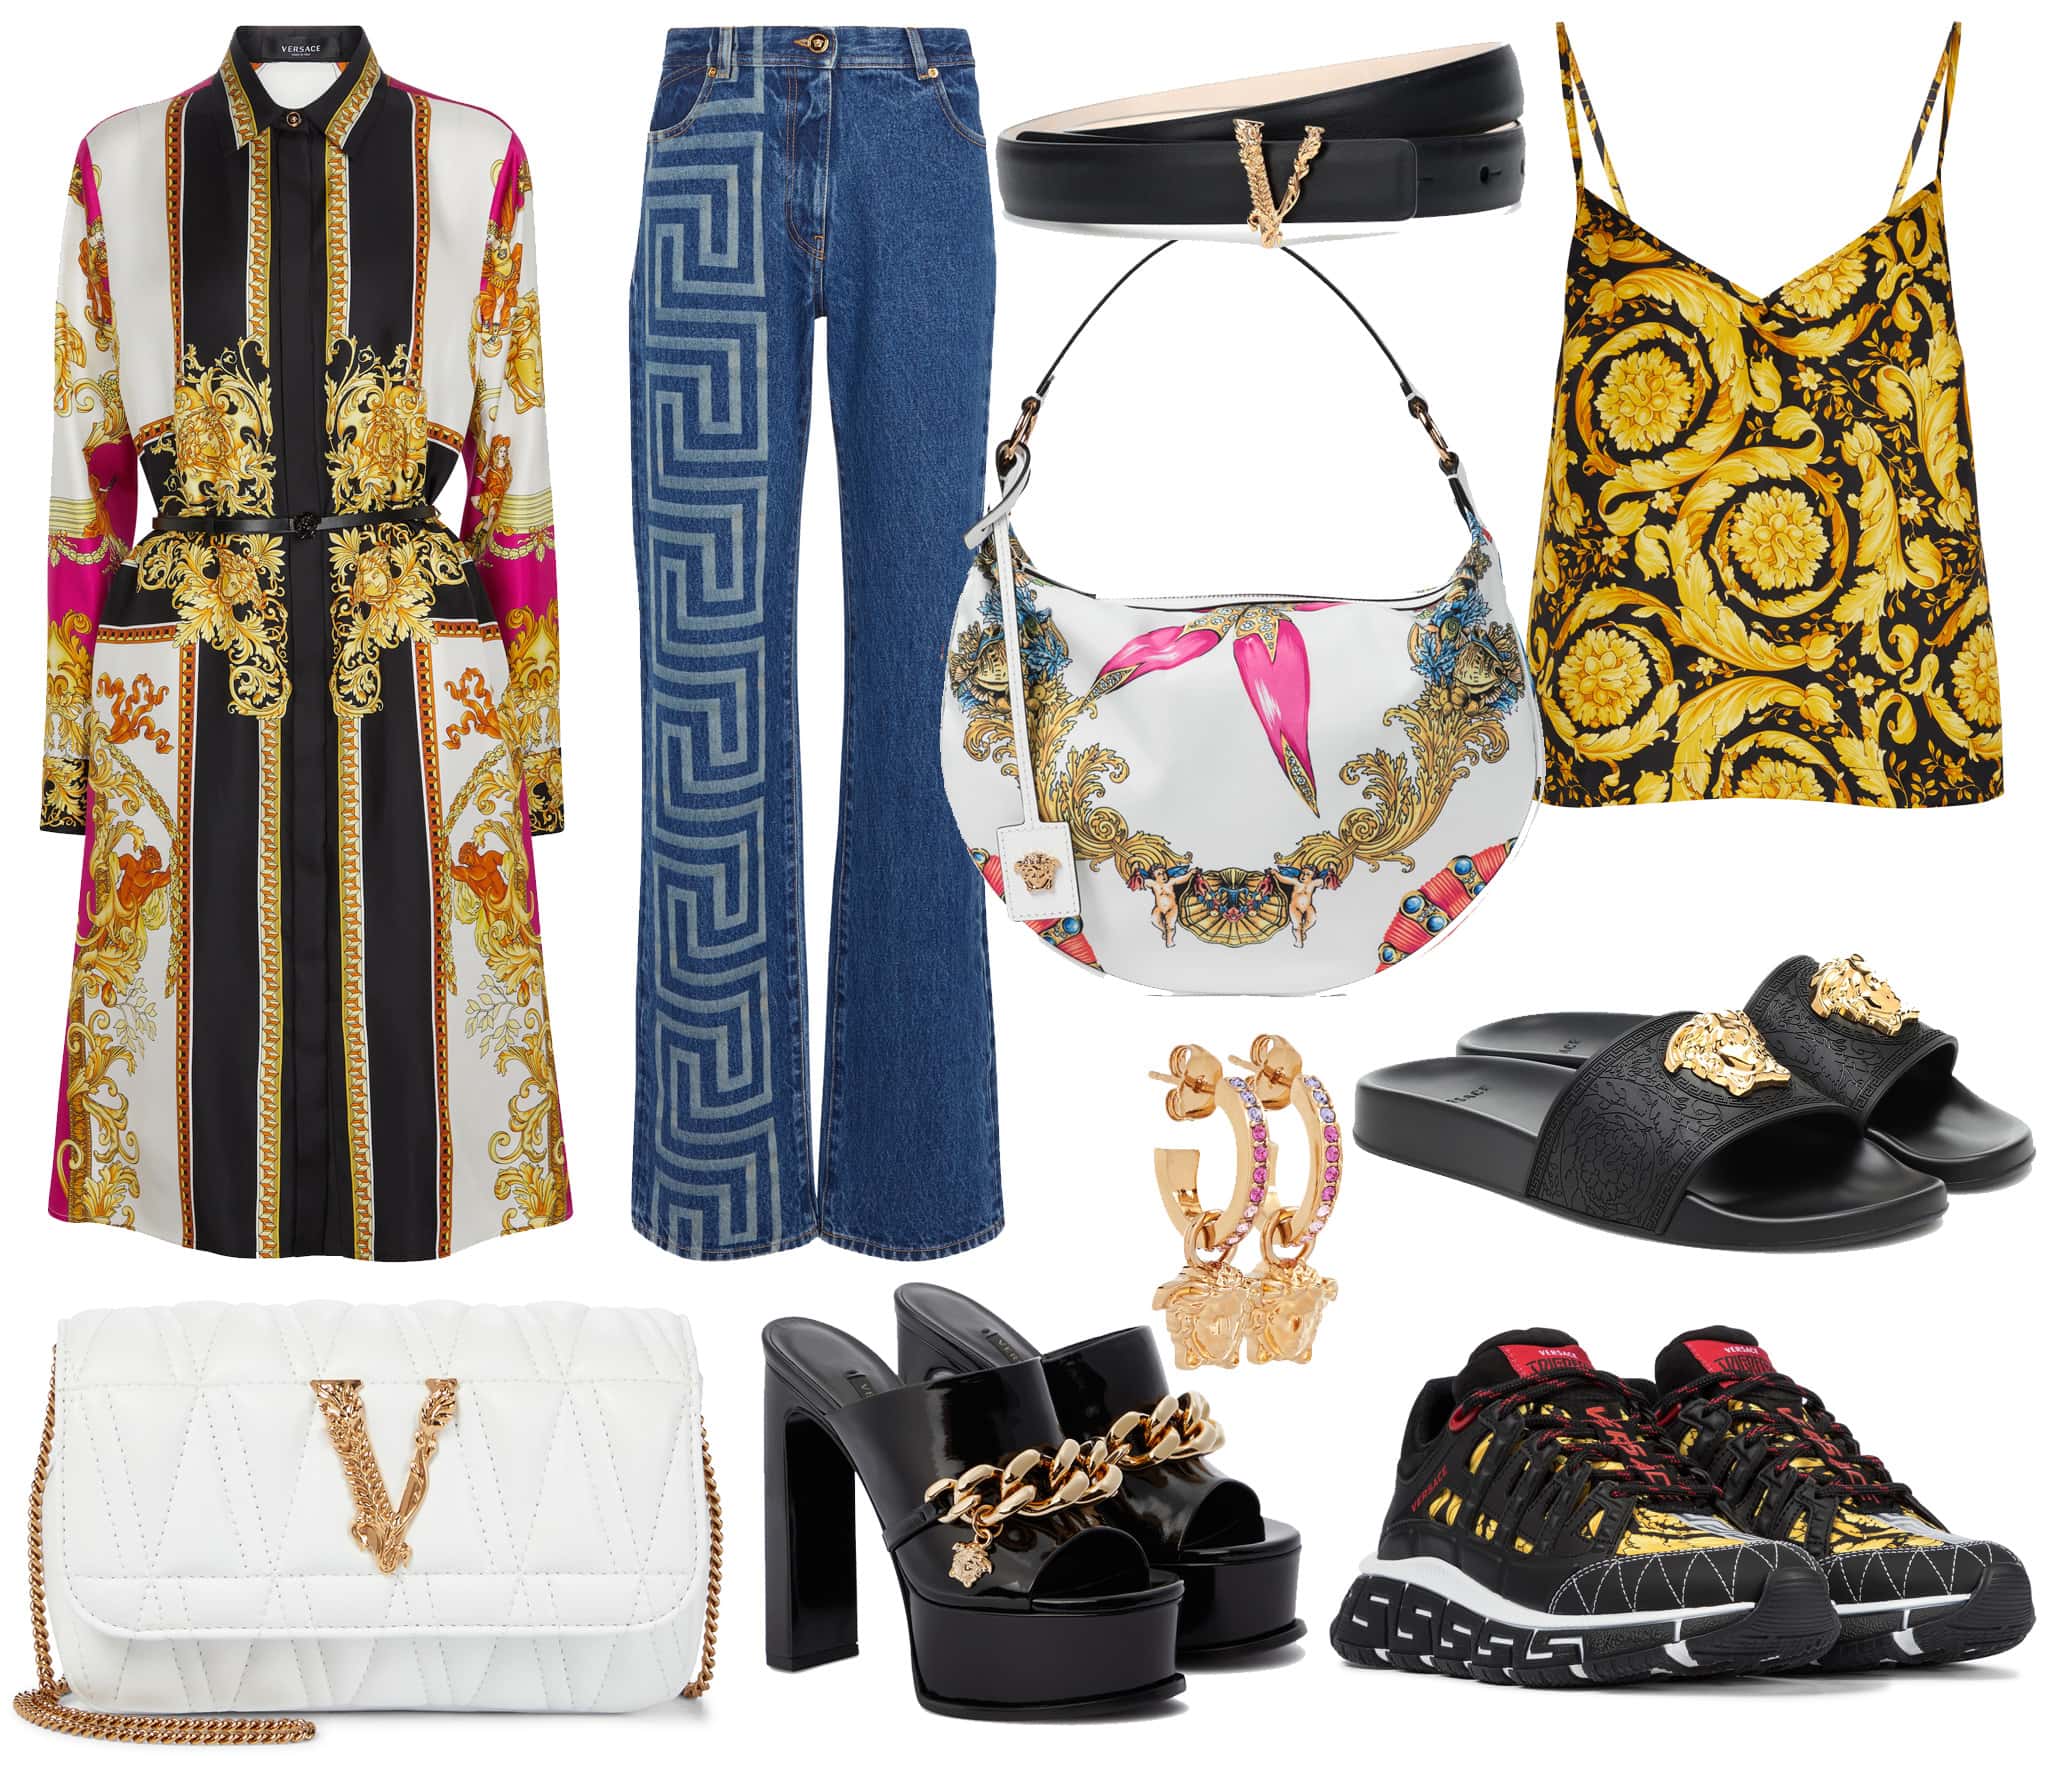 Versace designs feature bold patterns and vibrant prints usually incorporating the Medusa emblem